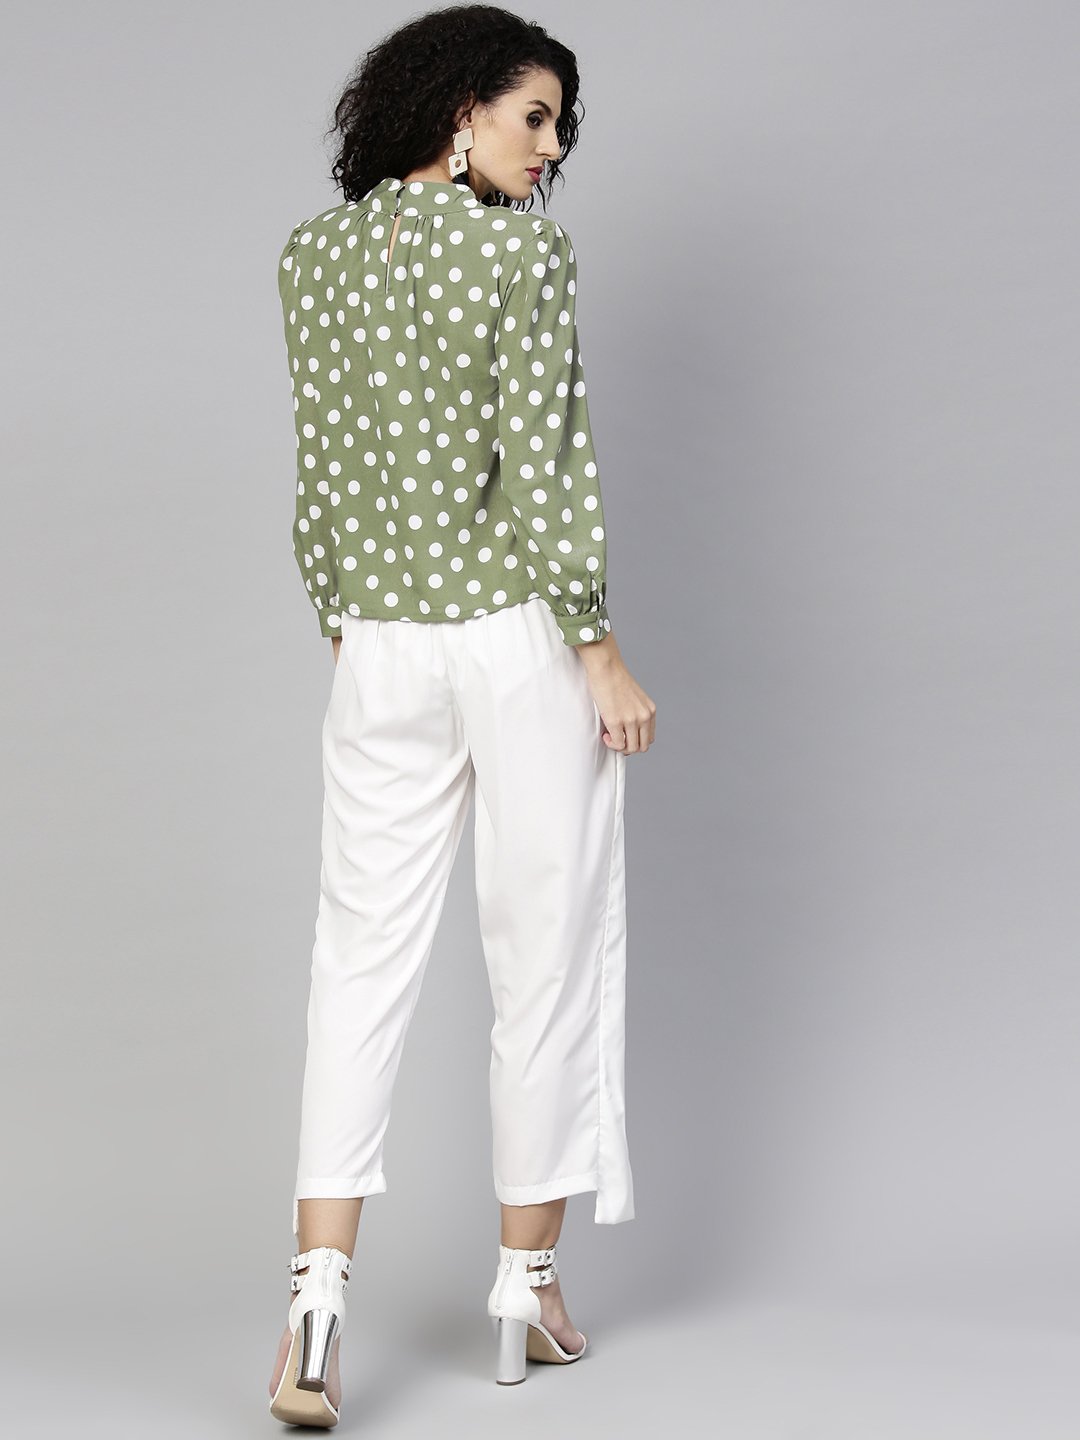 Women's Olive Green & White Printed Top With Trousers - Nayo Clothing